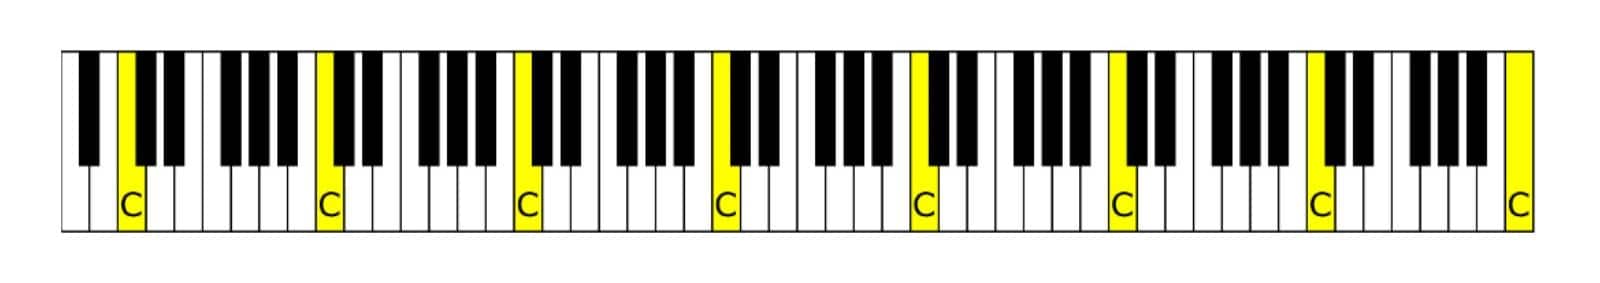 The C notes on a piano